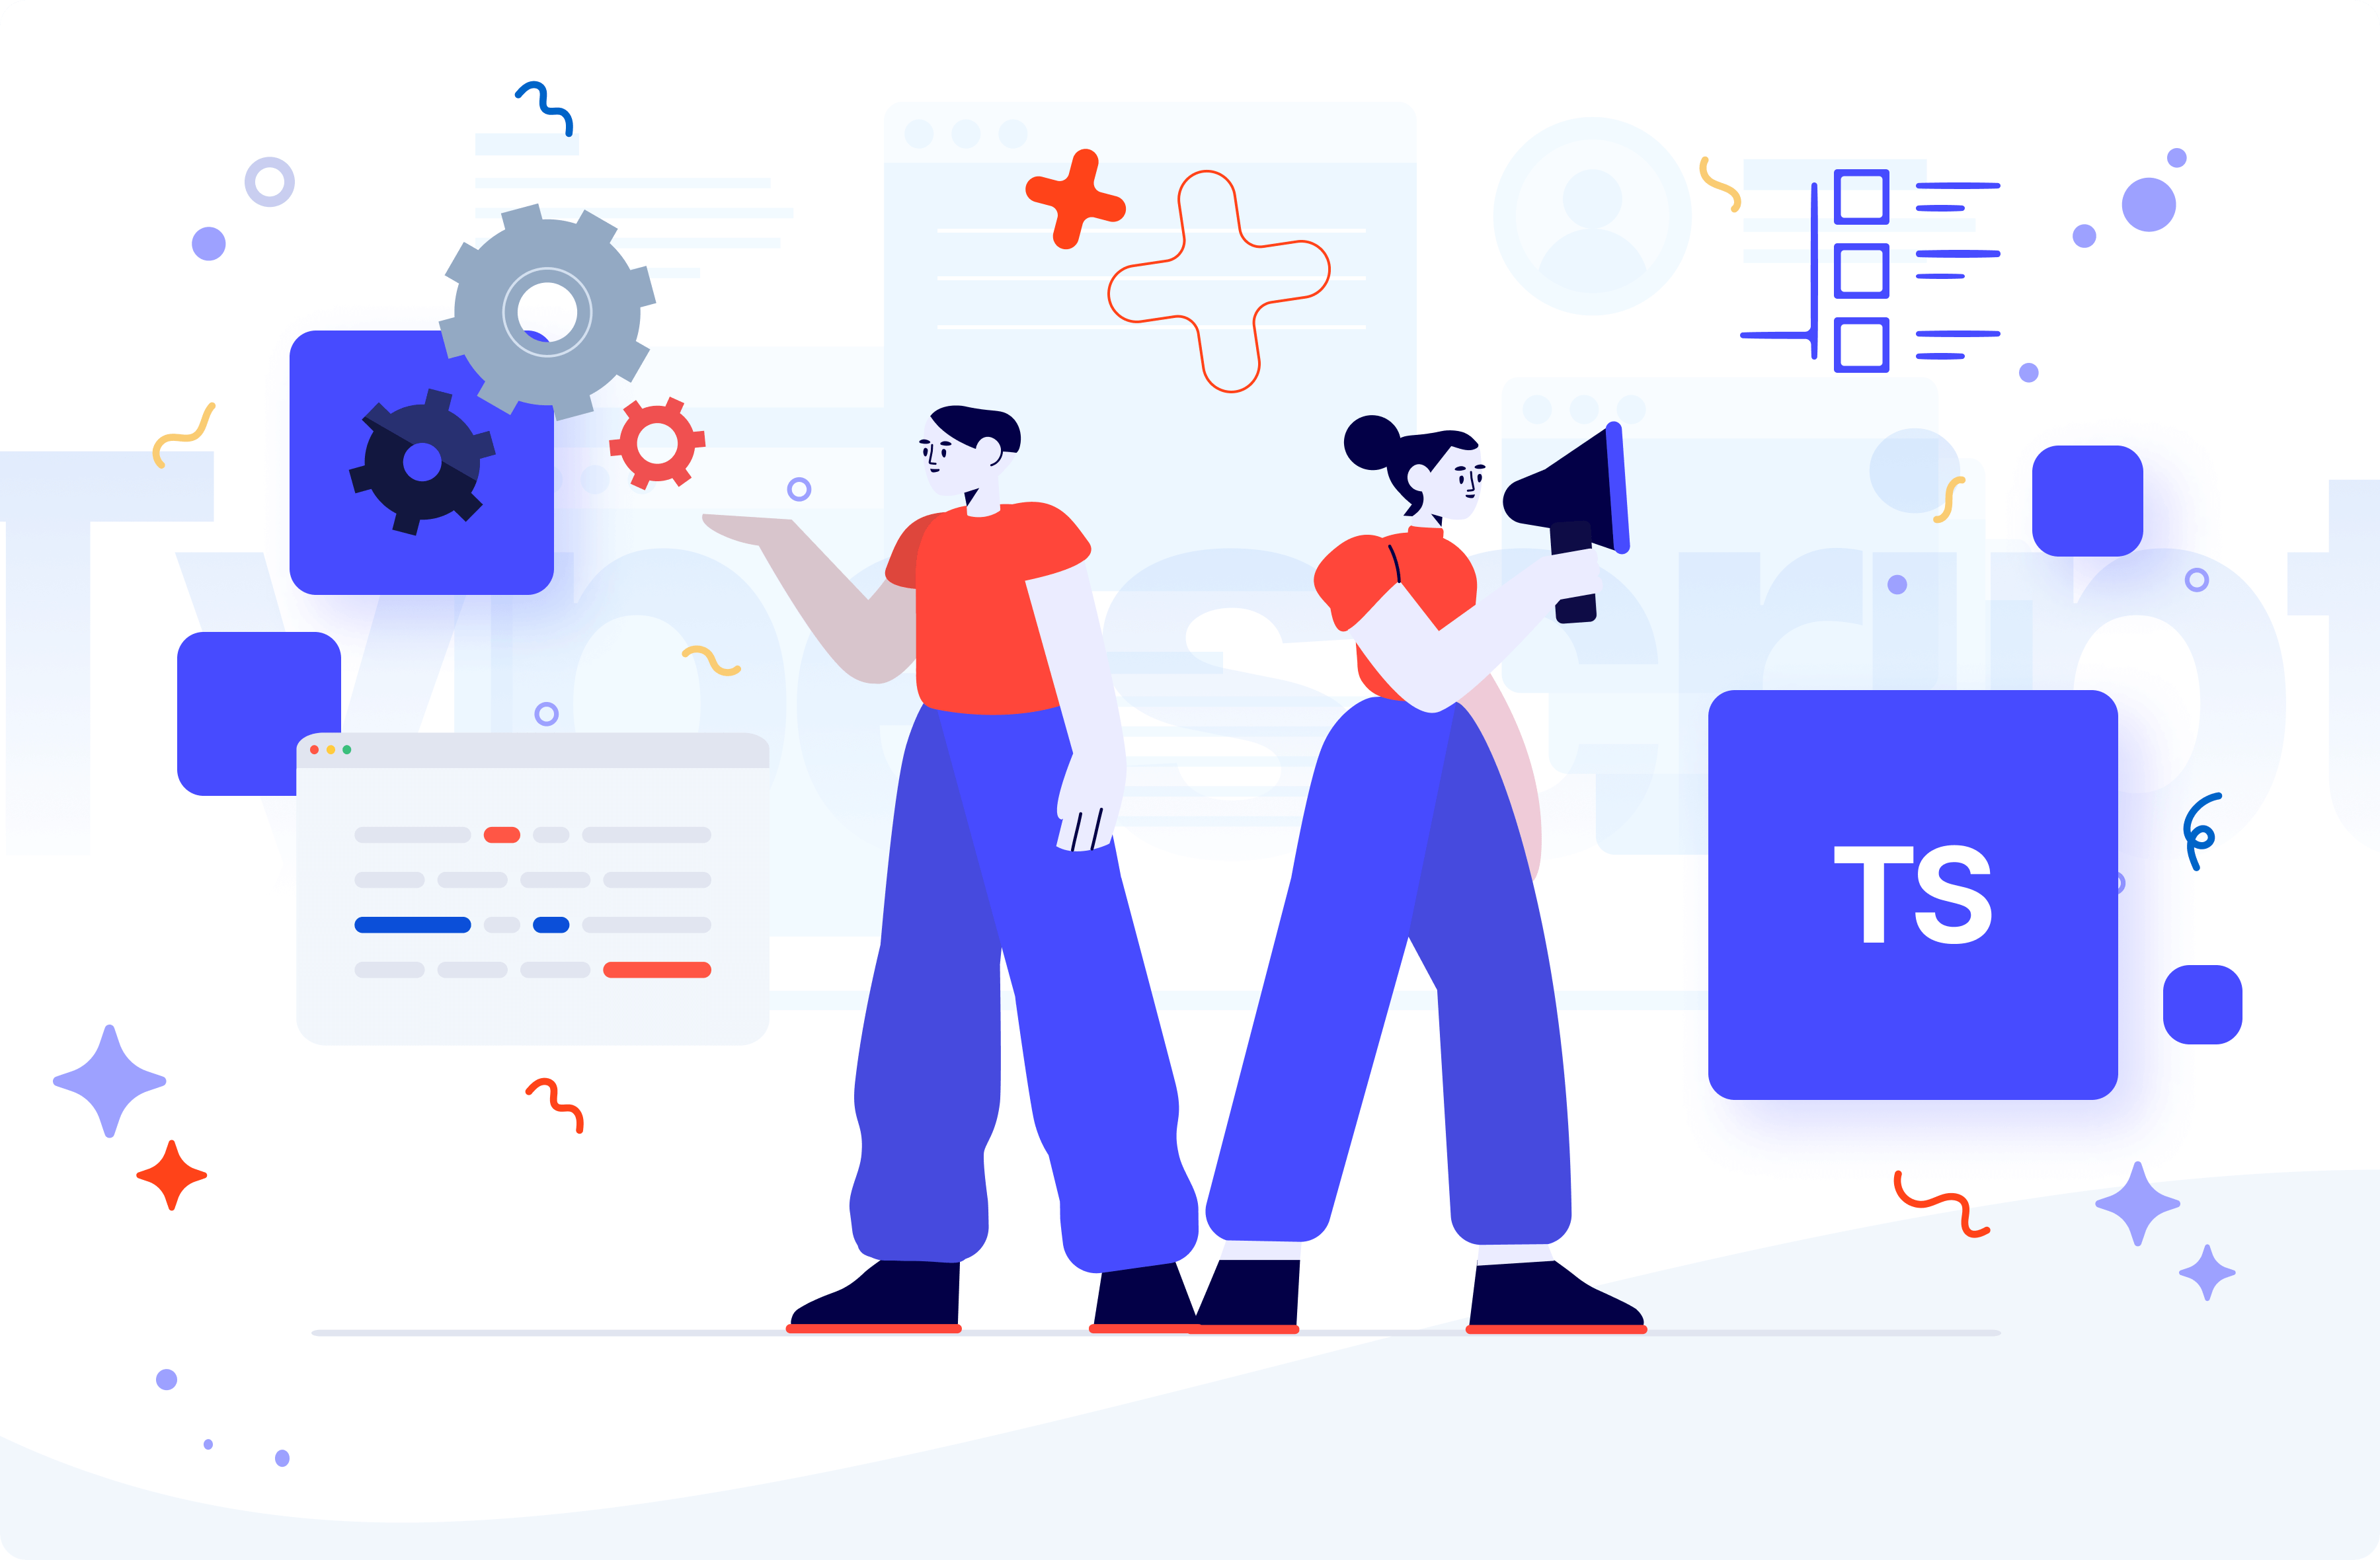 New TypeScript features bring even more efficiency & protection to your code. Check out TypeScript version 4.1-4.7 overview